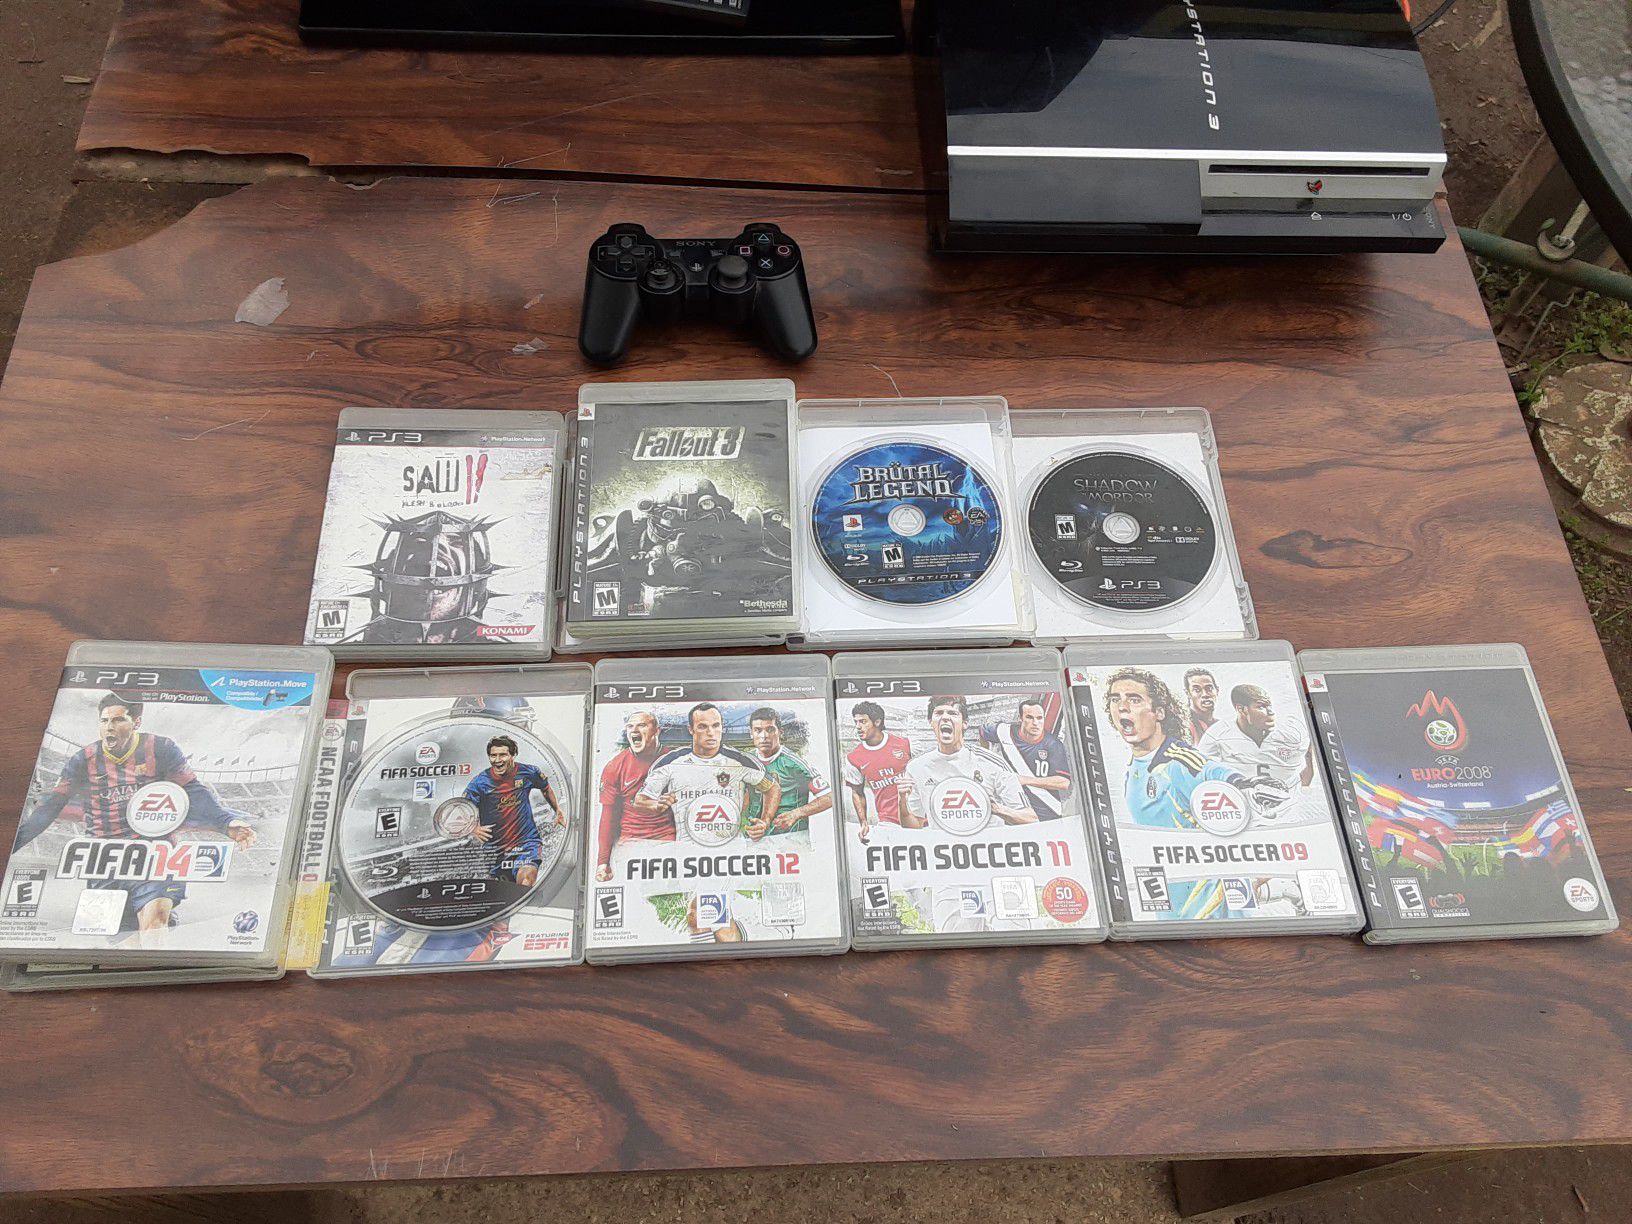 80GB PS3 with wireless controller and all cords and games